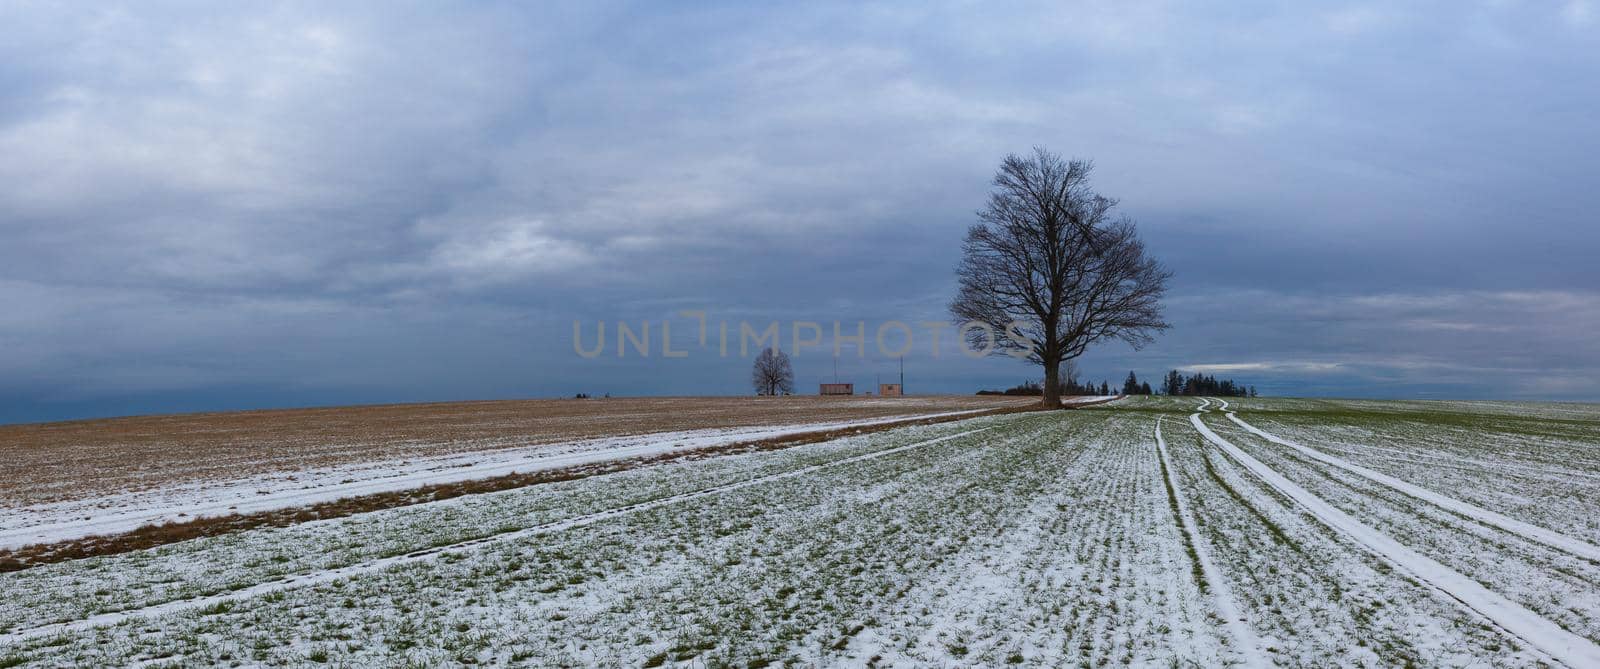 Lonely tree on the empty field in the winter  by CaptureLight